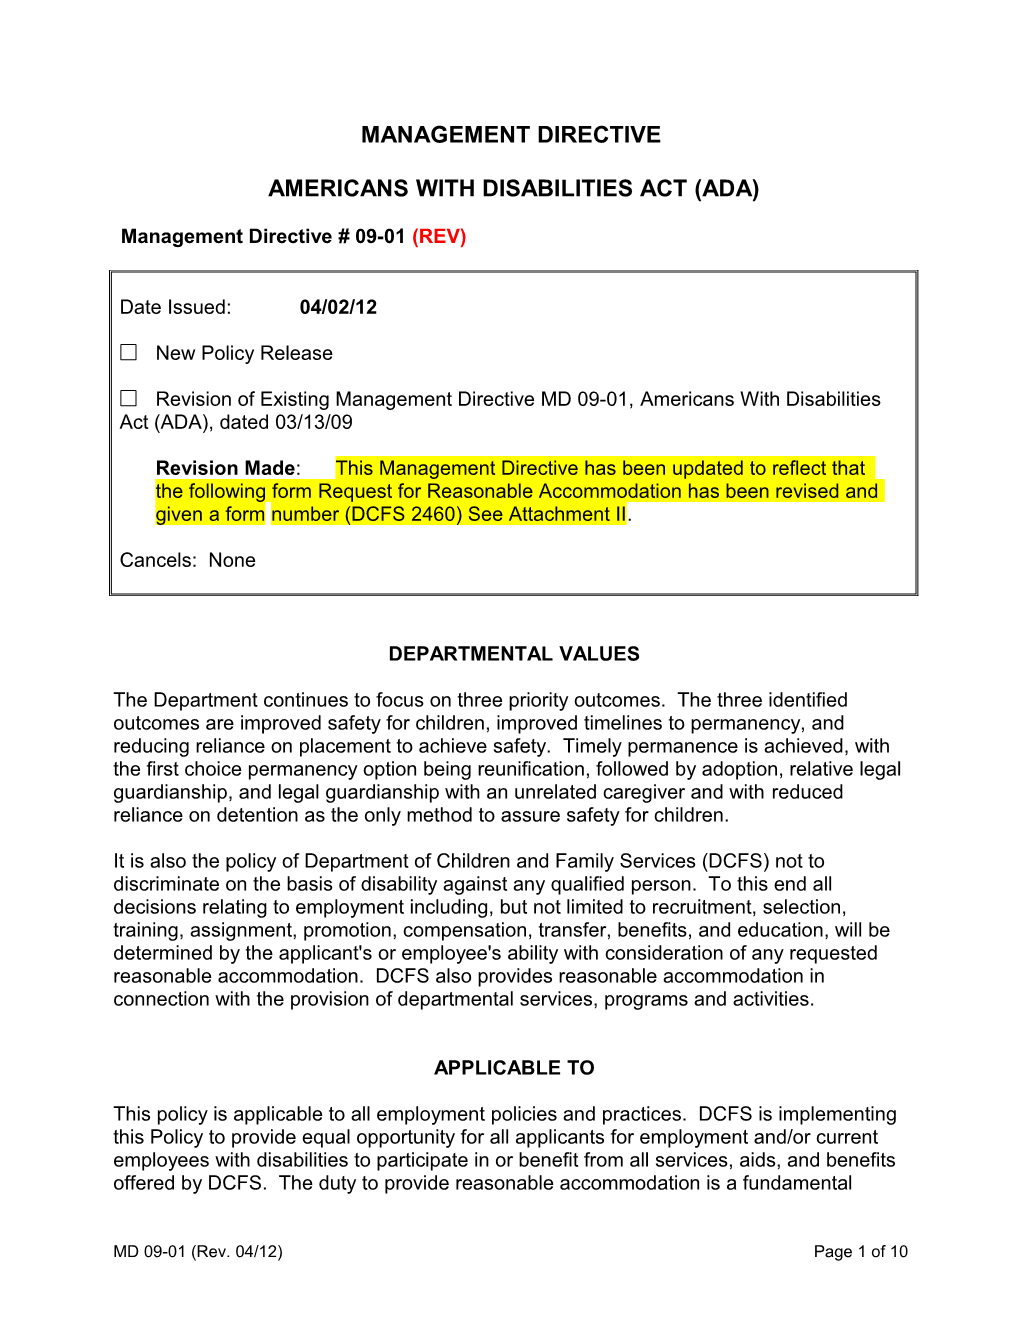 MD 09-01 (REV), Americans with Disabilities Act (ADA)